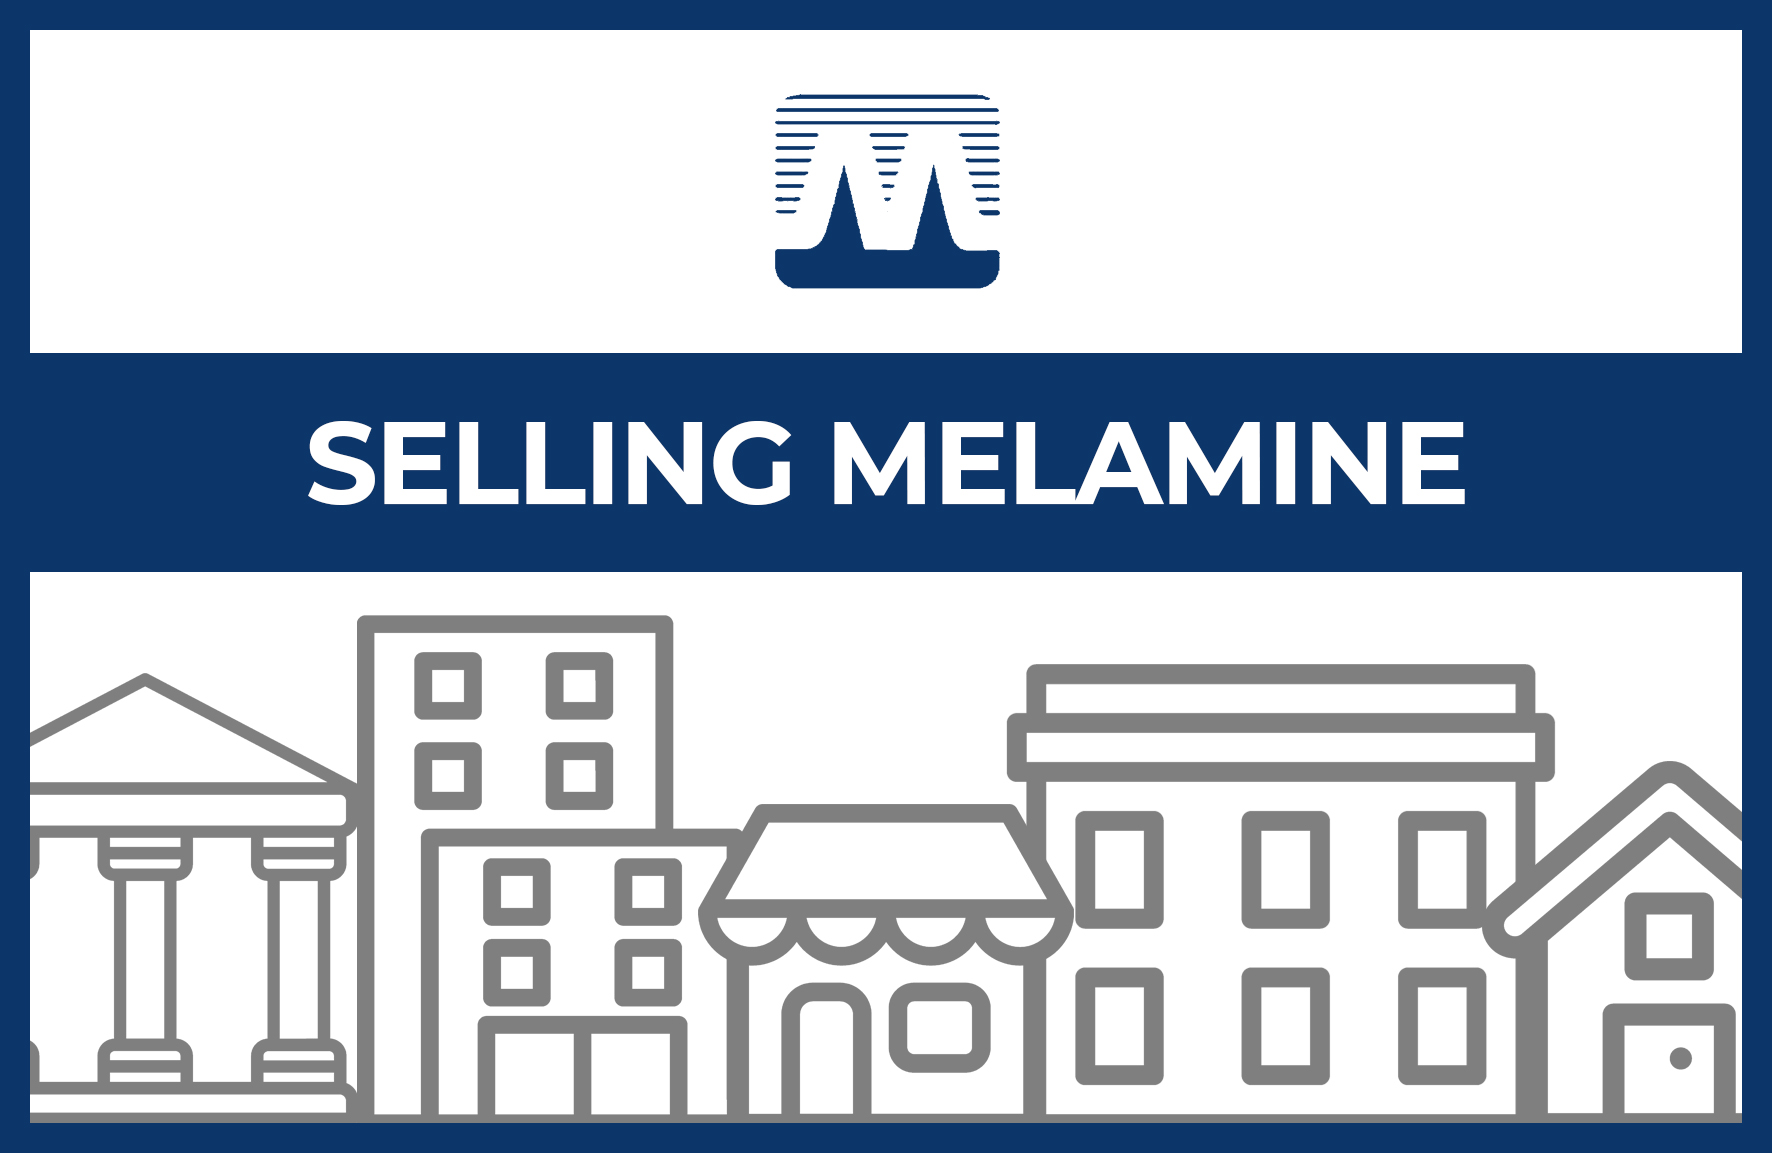 Where to sell Melamine with Melamaster banner image